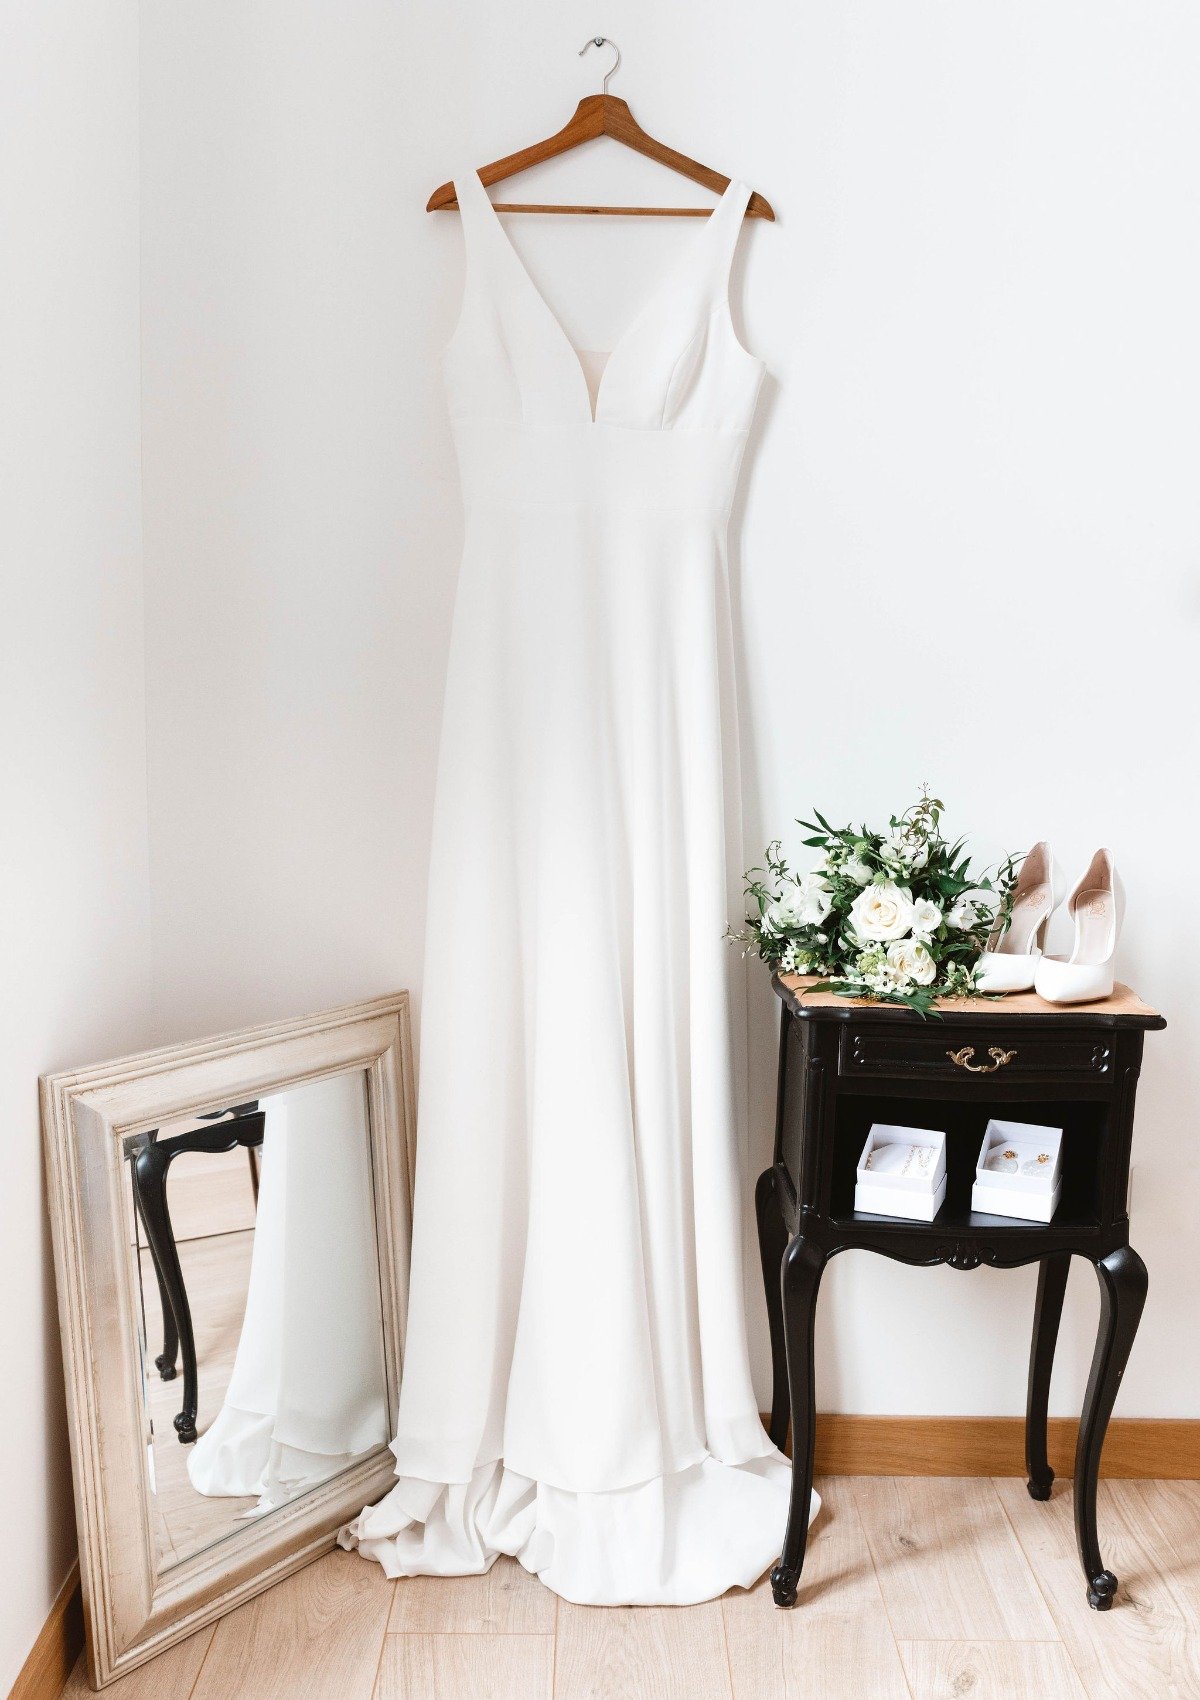 Bridal gown on hanger with mirror, shoes, and bouquet